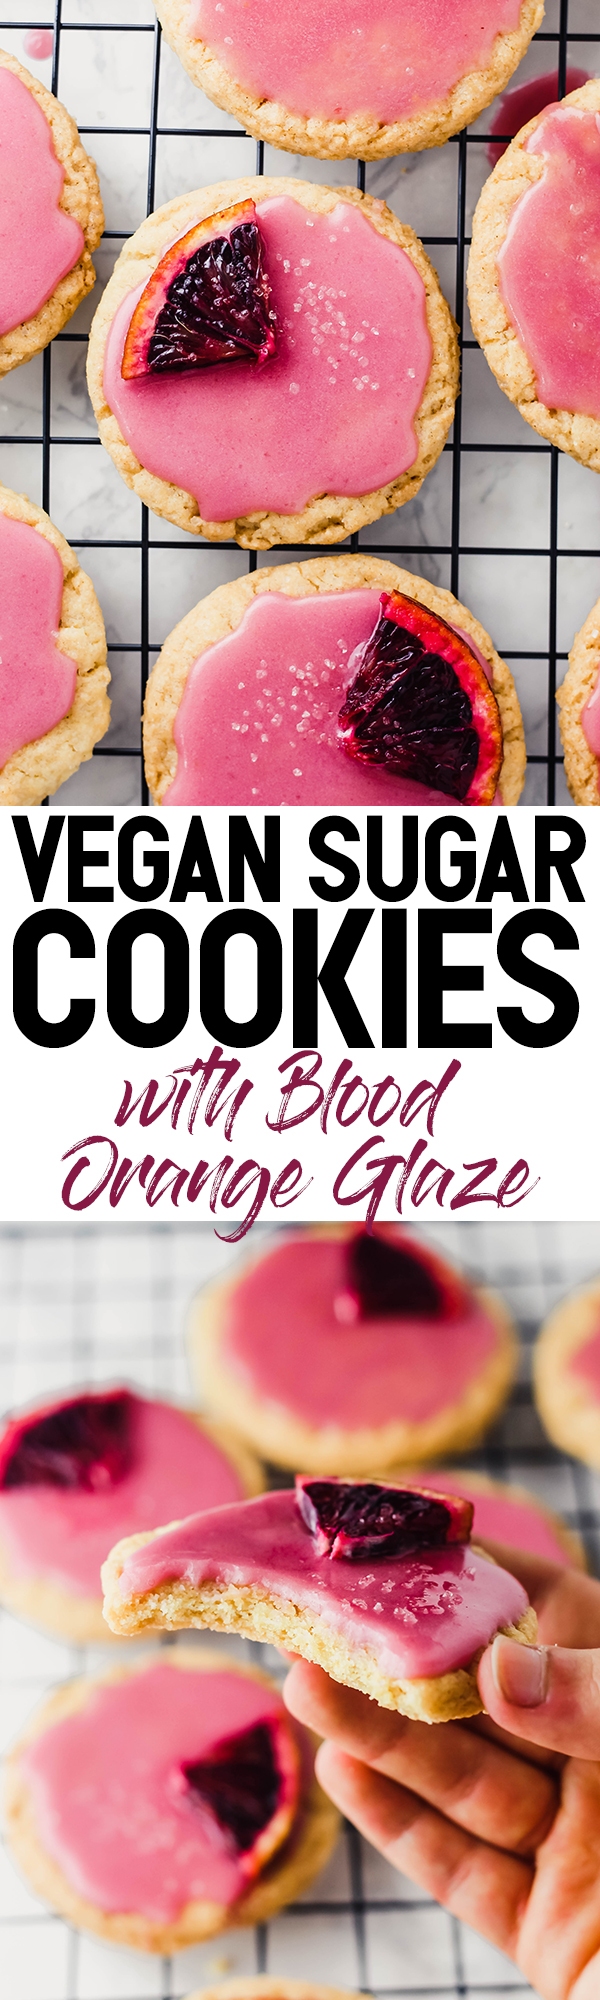 Enjoy these colorful Vegan Sugar Cookies with Blood Orange Glaze as a sweet springtime dessert! They’re soft on the inside, crispy on the outside and a bit healthier thanks to olive oil.